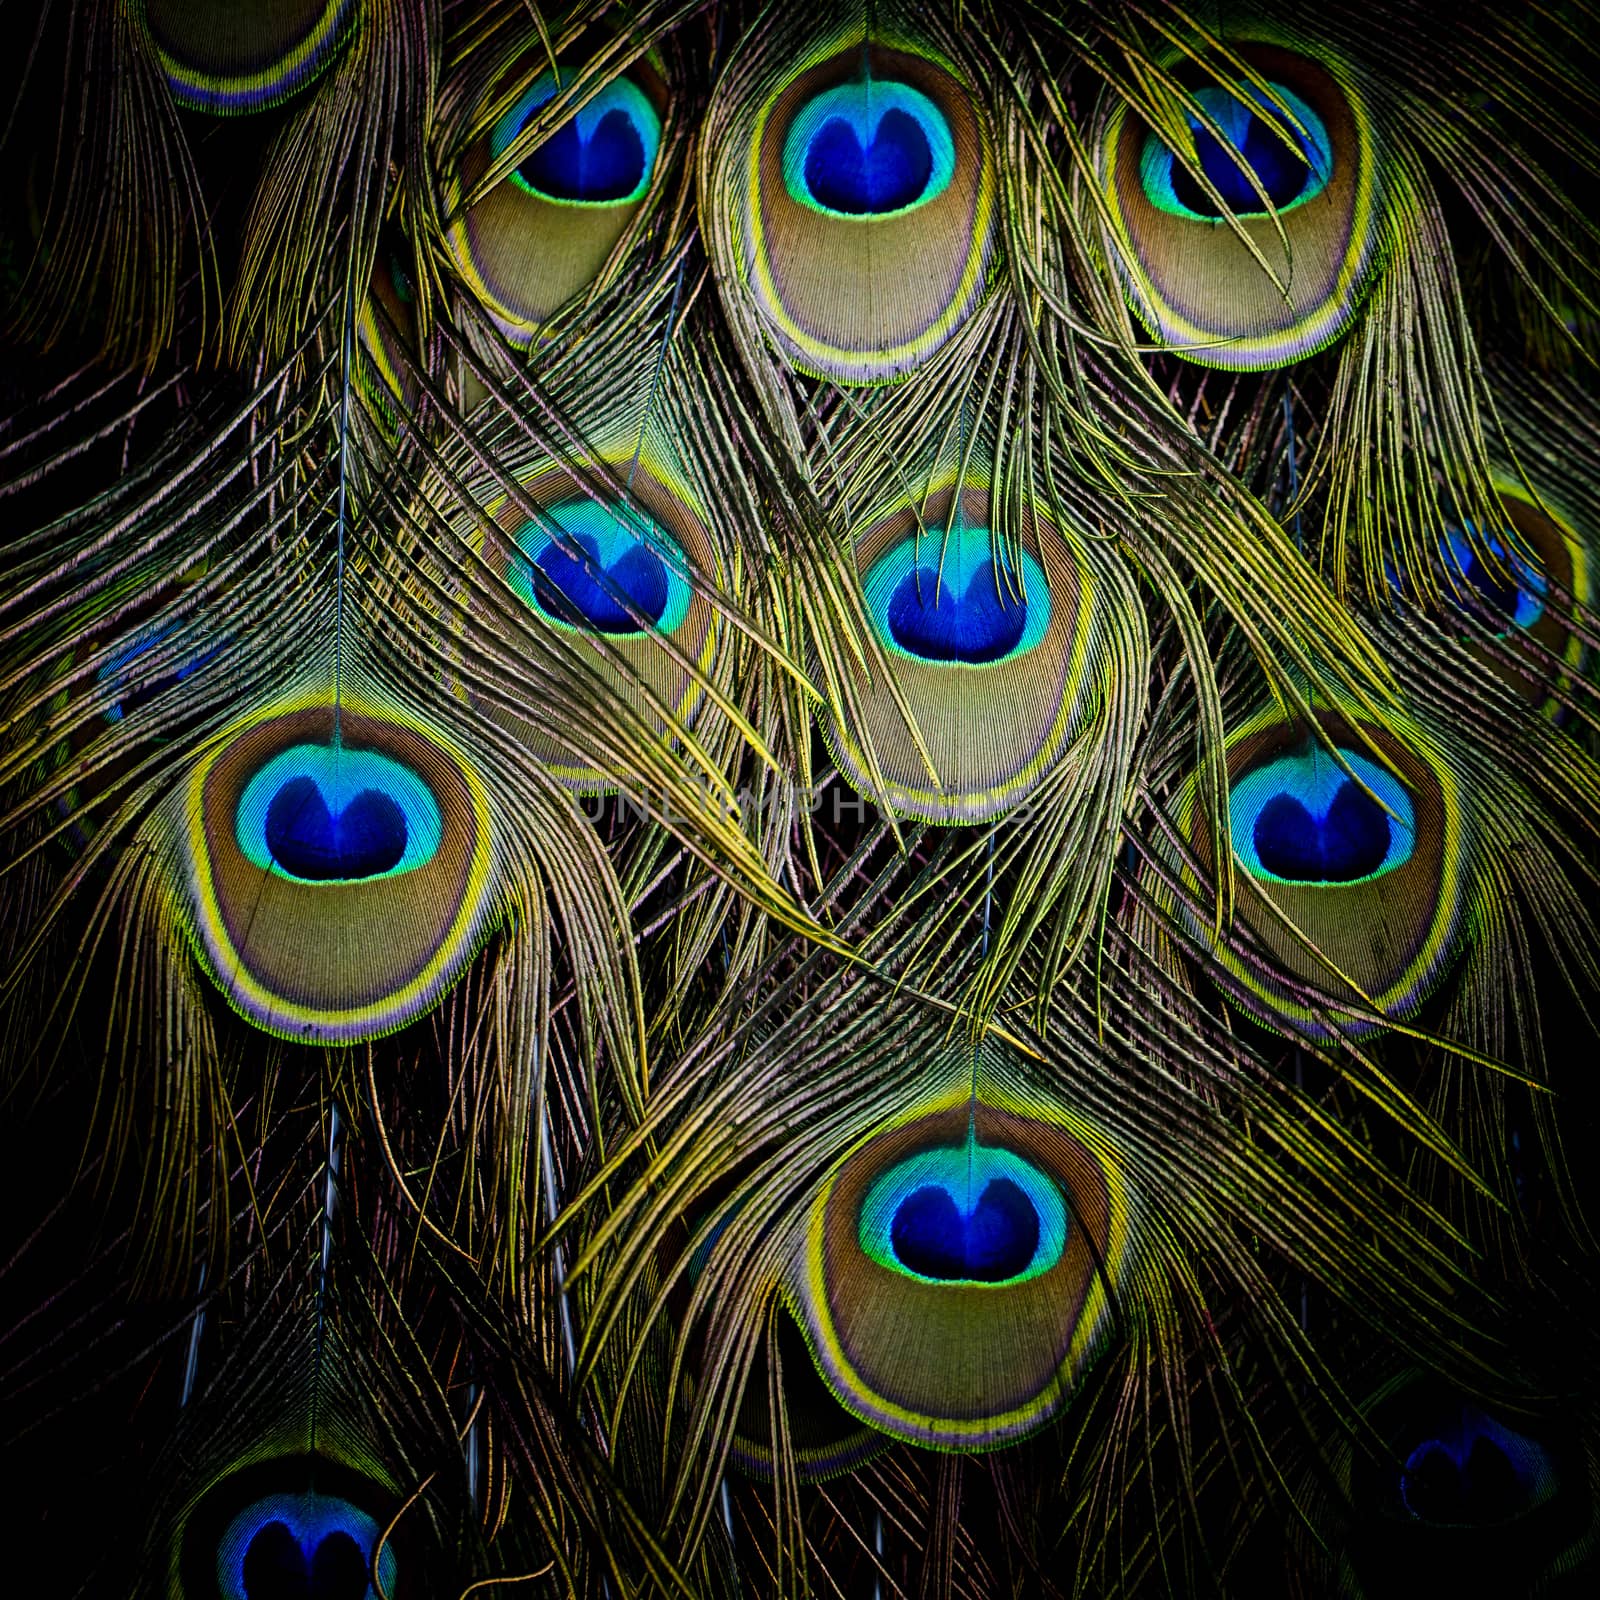 Peacock green and blue plumage in close up.